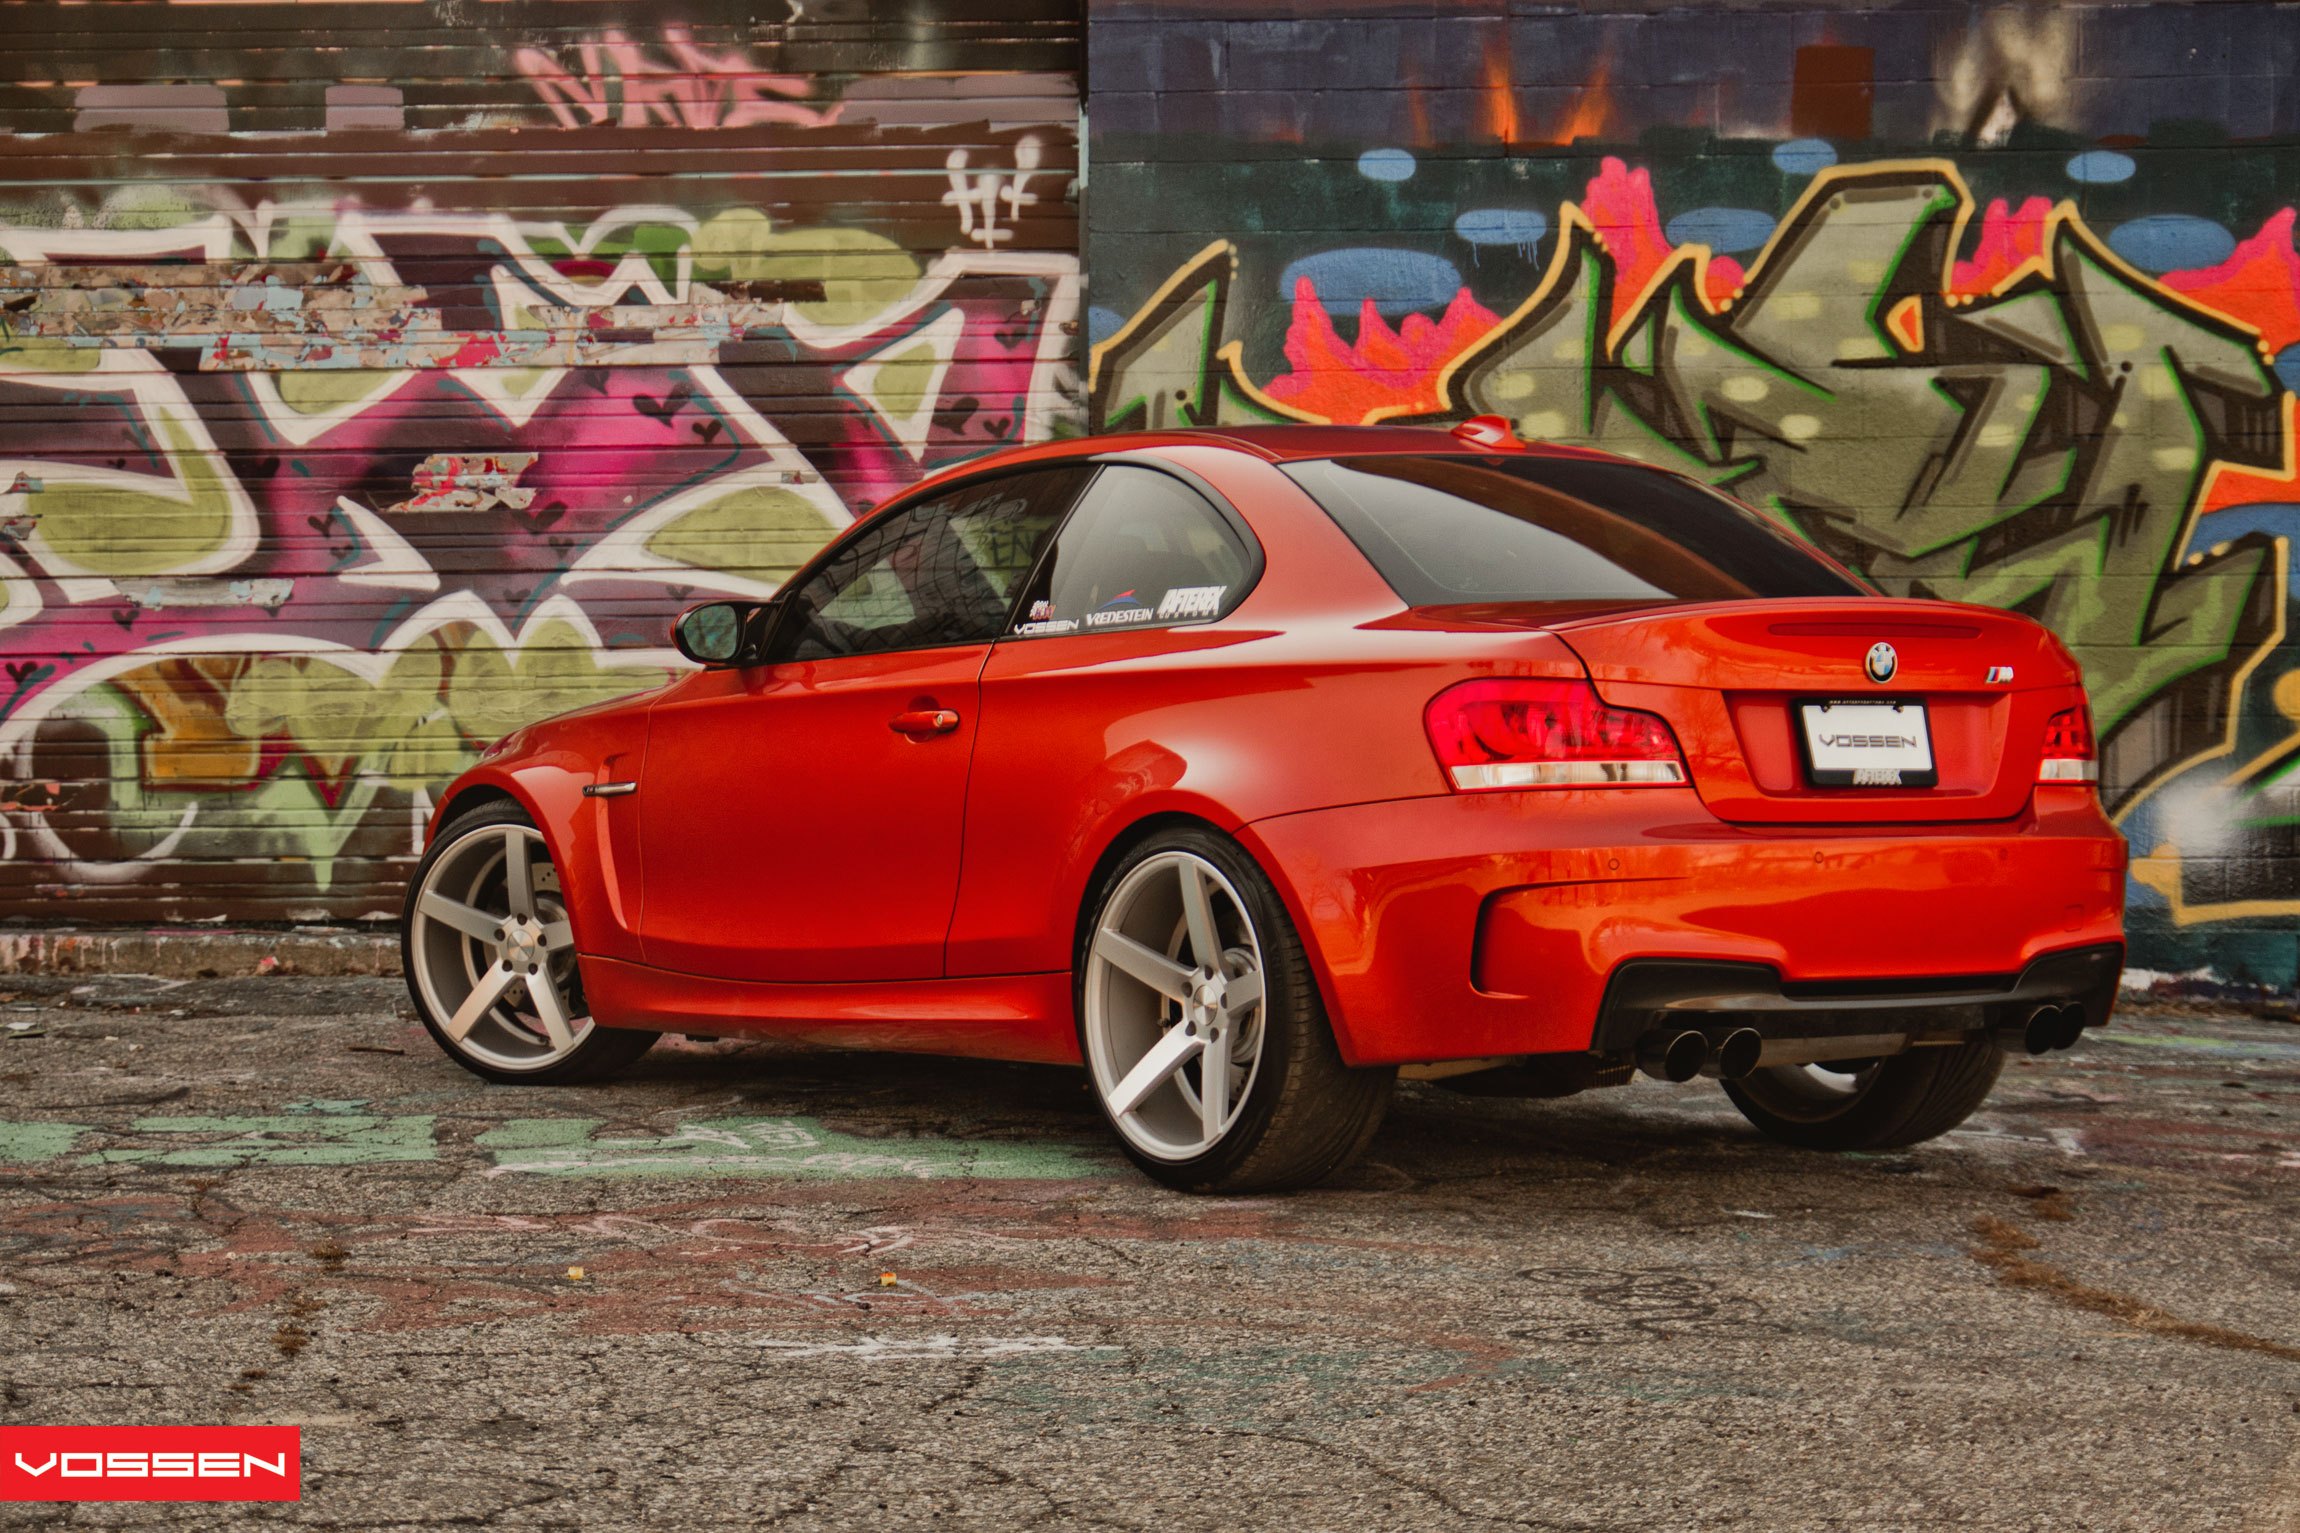 Aftermarket Rear Diffuser on Red BMW 1-Series - Photo by Vossen